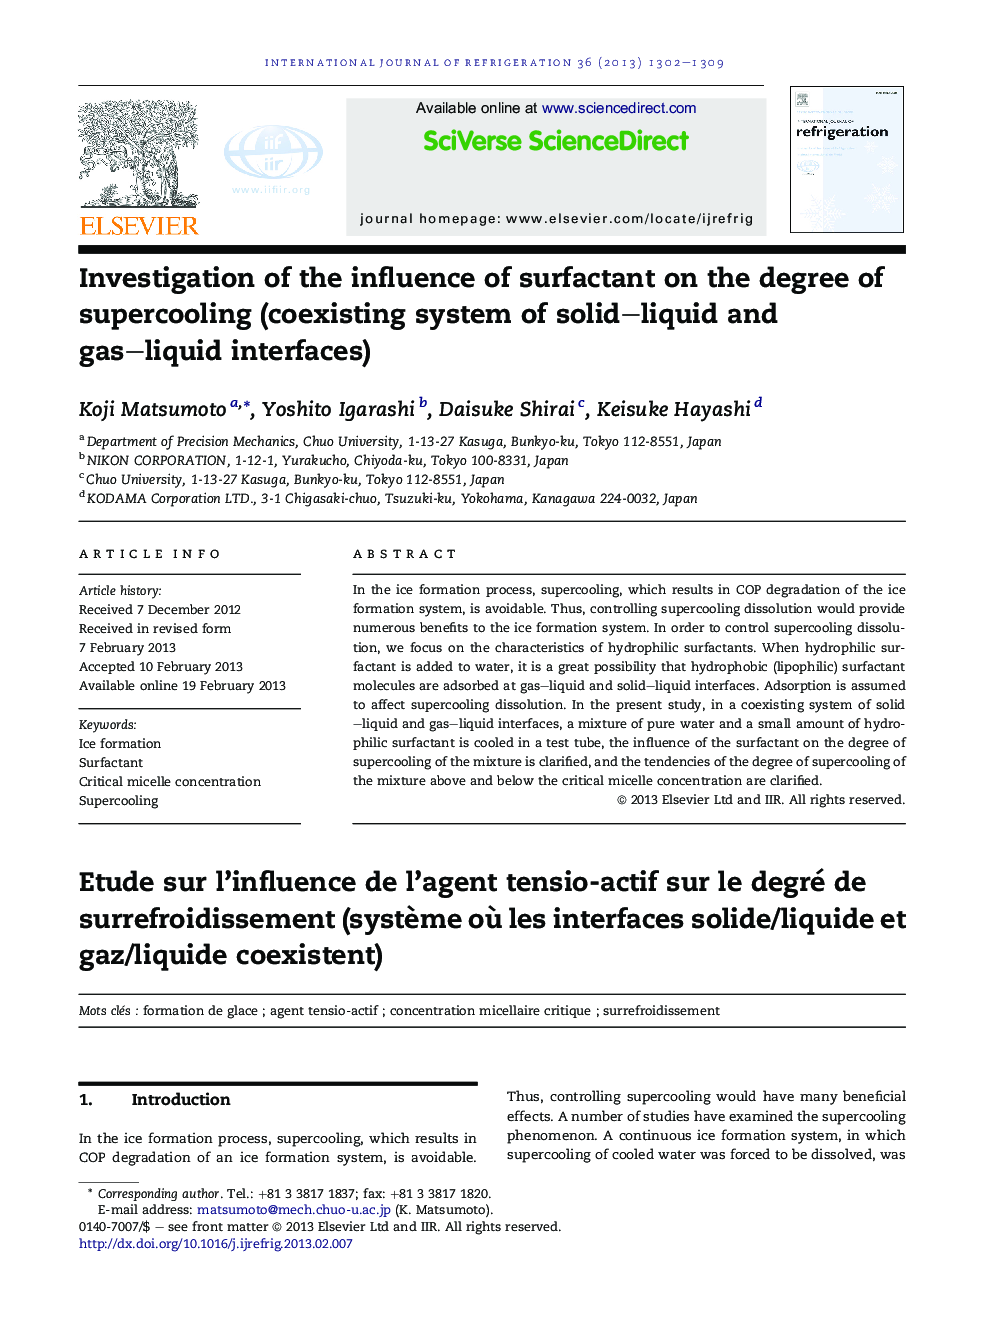 Investigation of the influence of surfactant on the degree of supercooling (coexisting system of solid–liquid and gas–liquid interfaces)